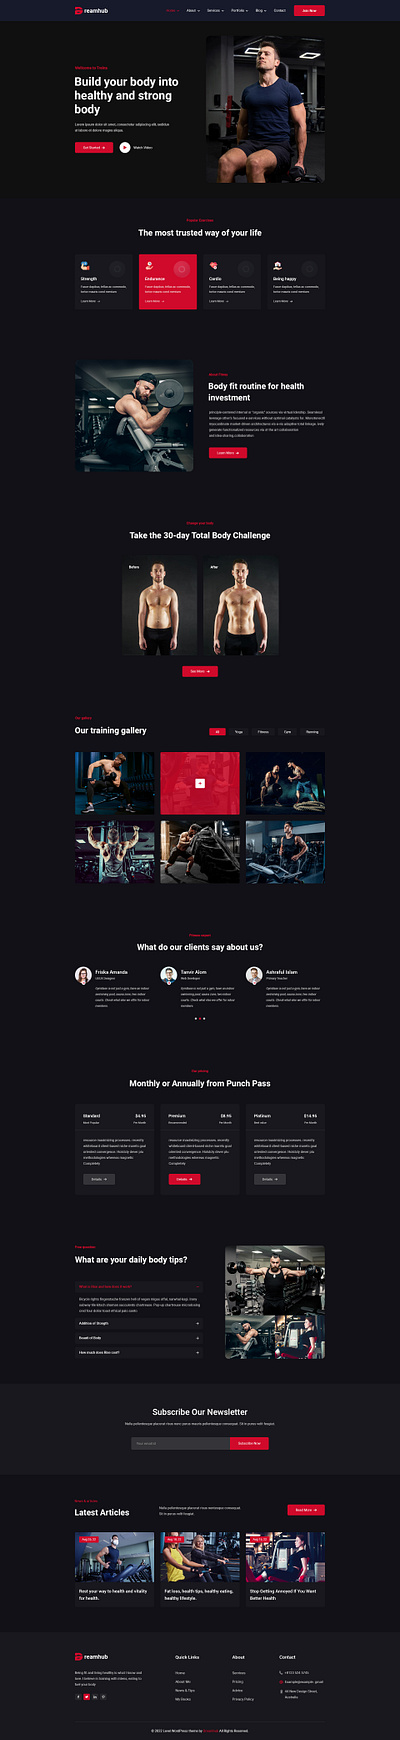 DreamHub Personal Trainer And Fitness GYM HTML5 Template